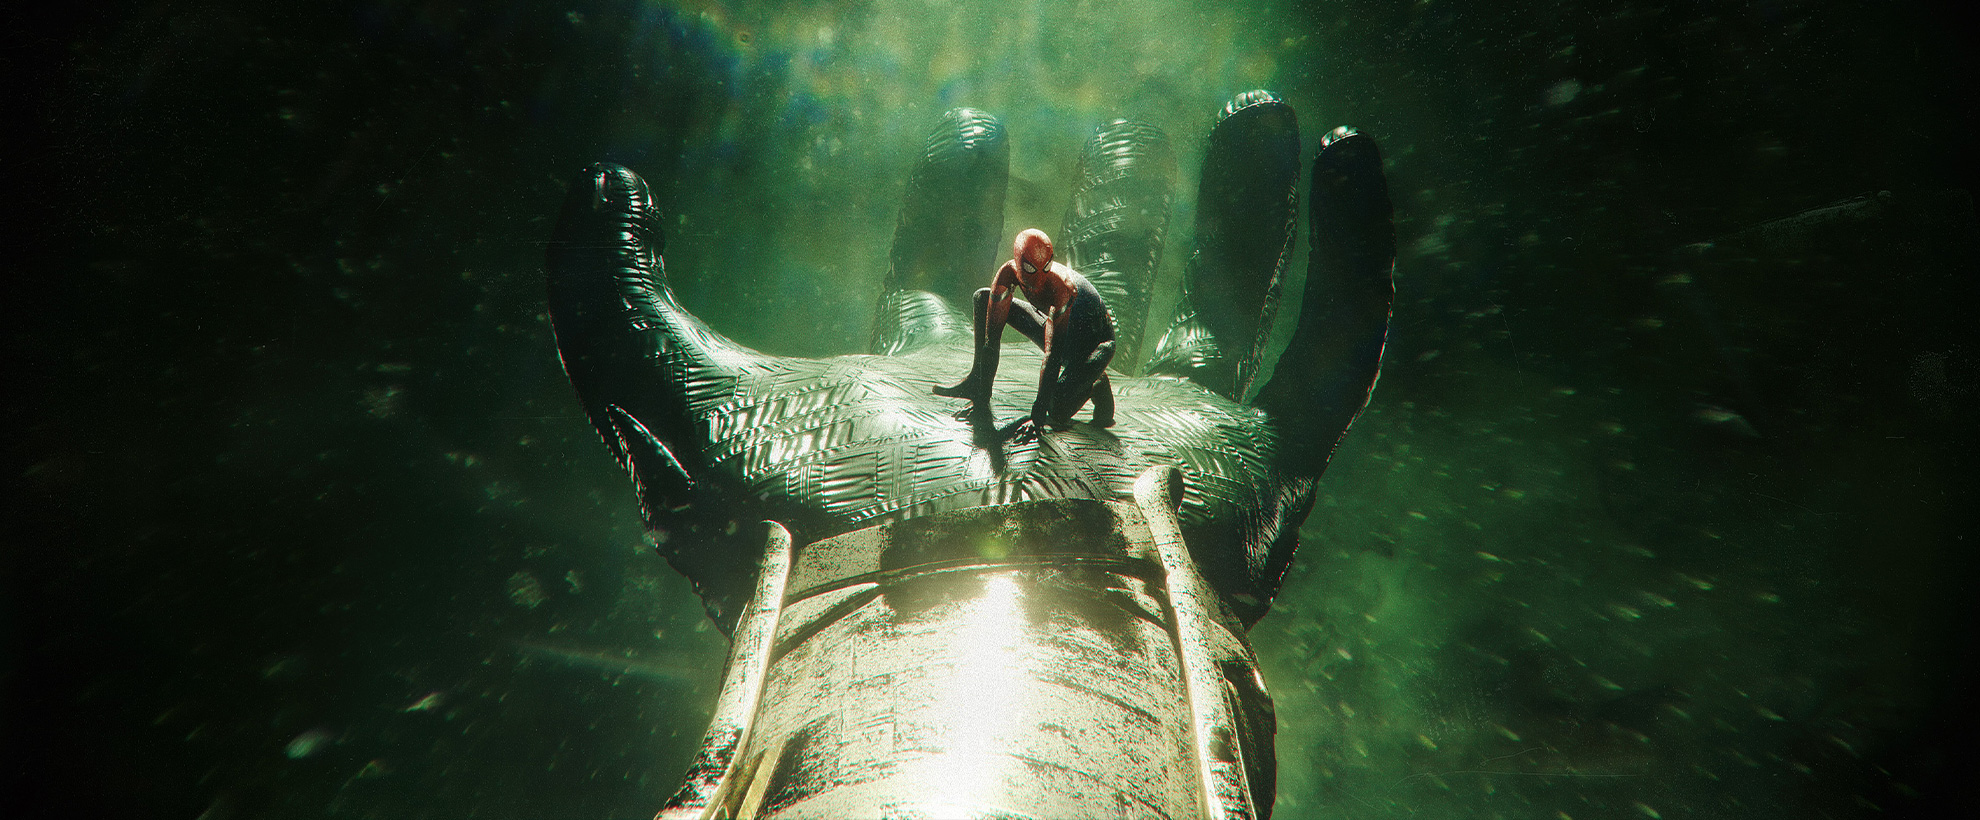 Concept Art of Spider-Man, held in the palm of Mysterio's hand